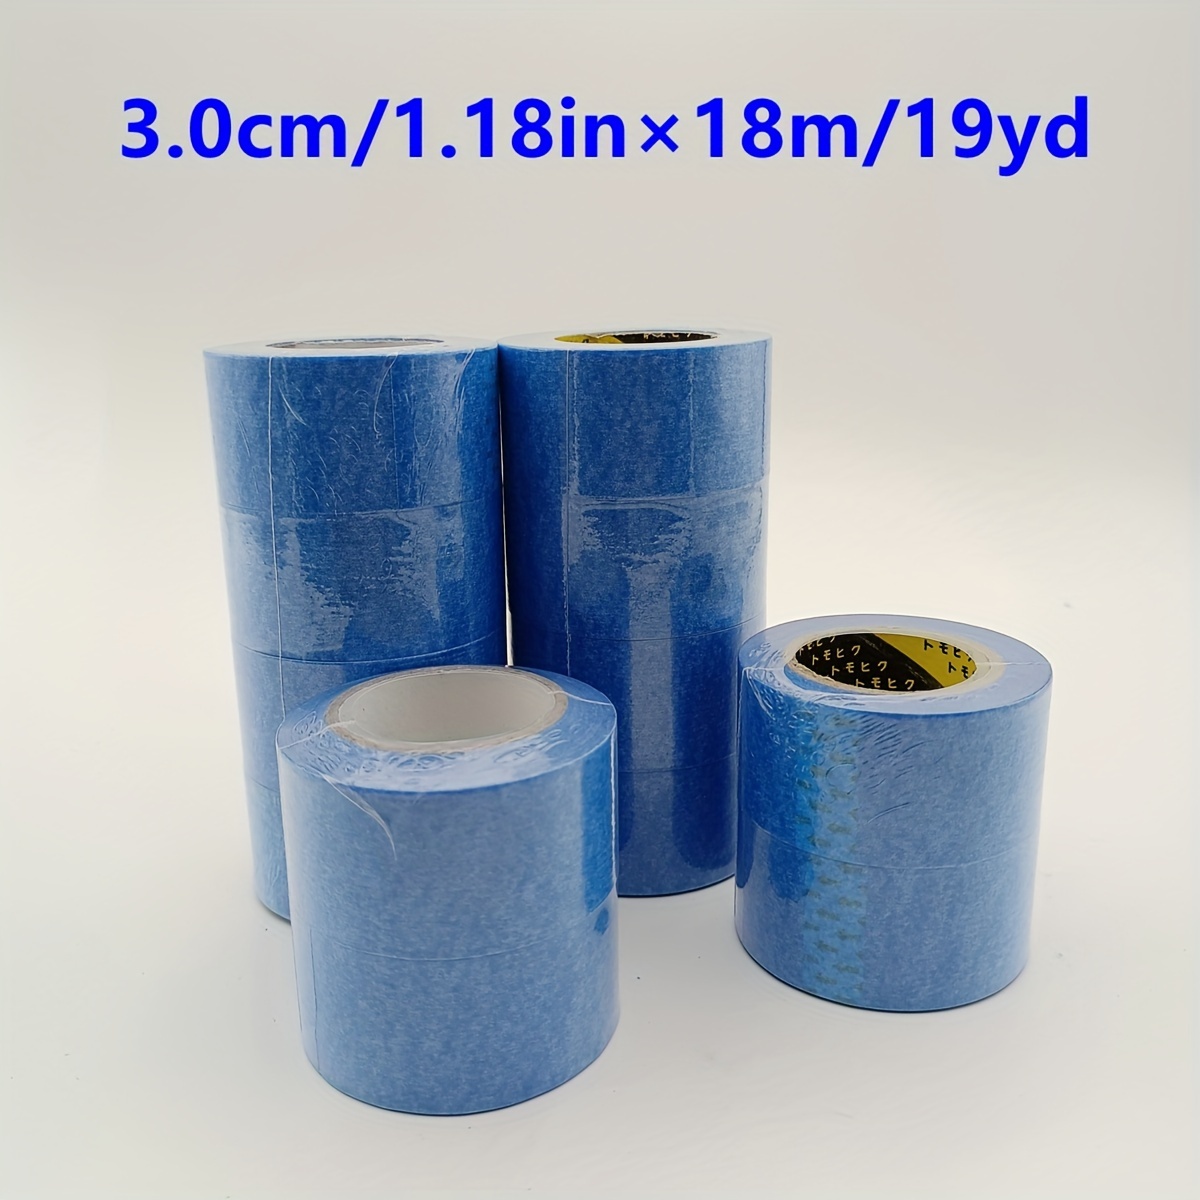 Bulk Tape, Blue Washi Tape, Multi-surface Paint Tape /19yd, Paint Tape  Protects Surfaces And Is Easy To Remove, Indoor Use - Temu